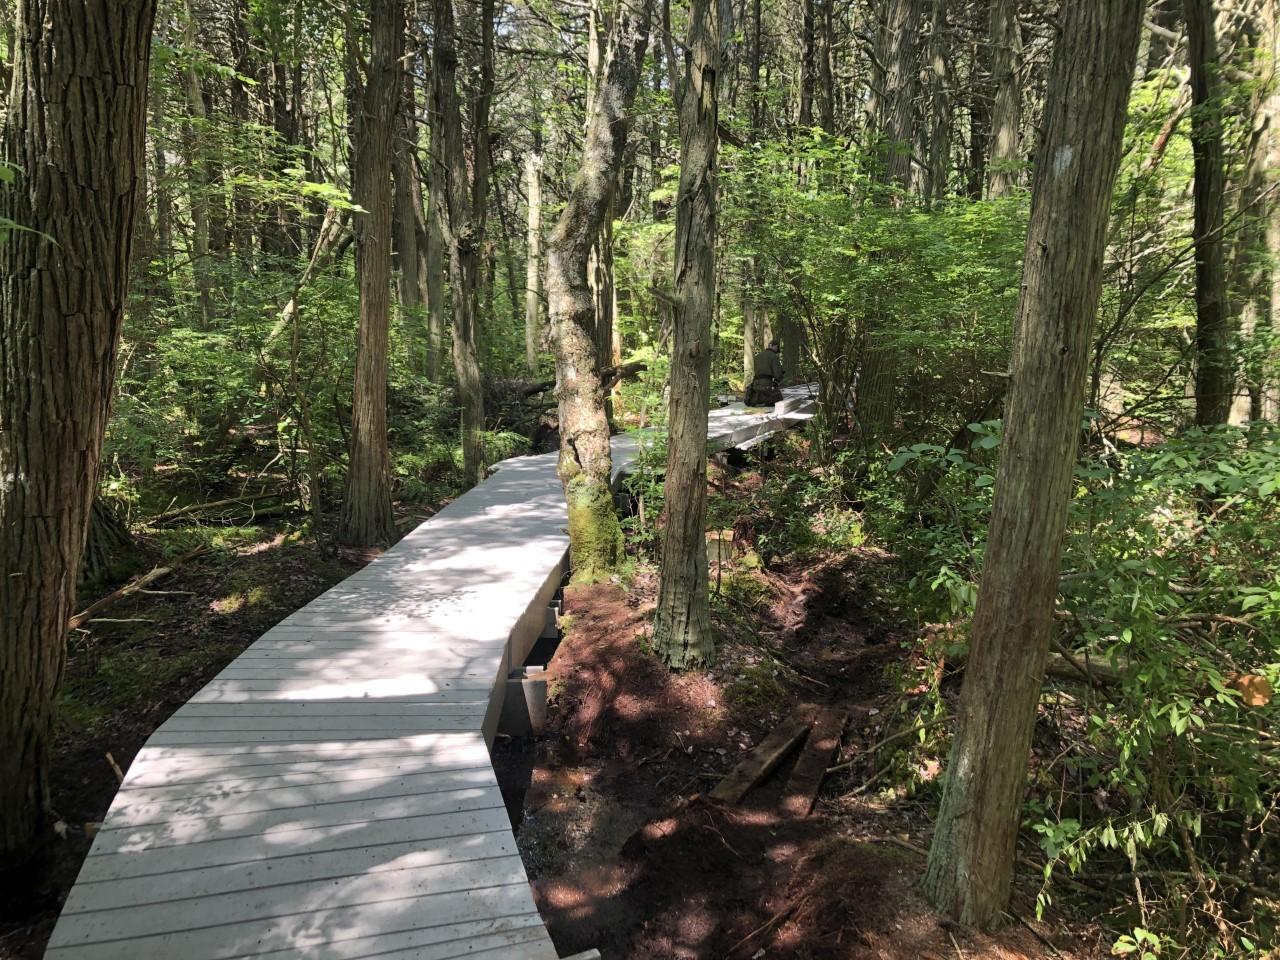 Boardwalk trail runs through a swamp surrounded by green ferns and tall trees.